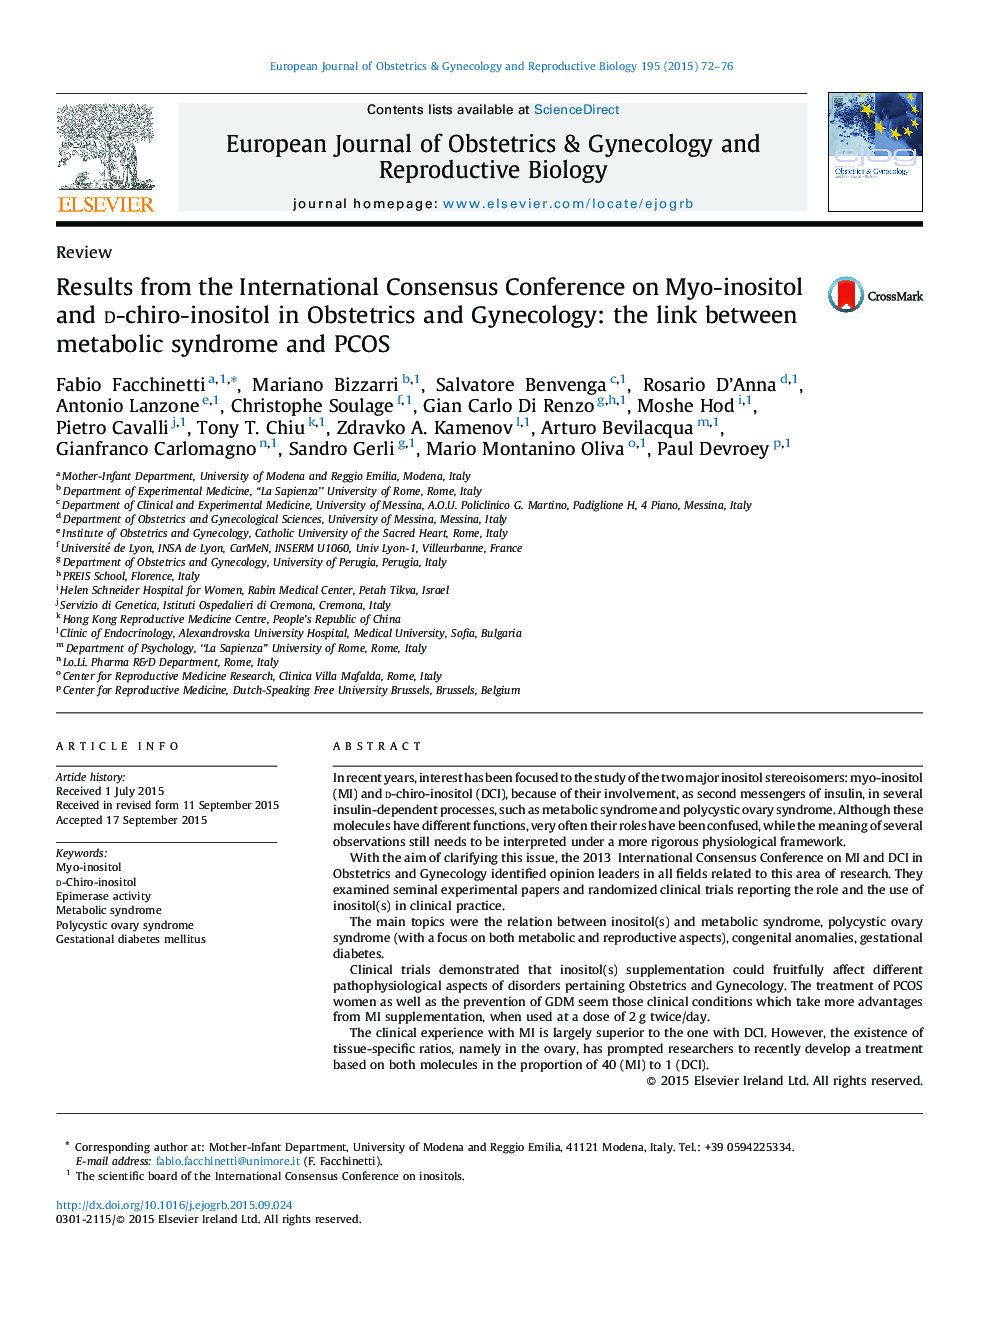 Results from the International Consensus Conference on Myo-inositol and d-chiro-inositol in Obstetrics and Gynecology: the link between metabolic syndrome and PCOS